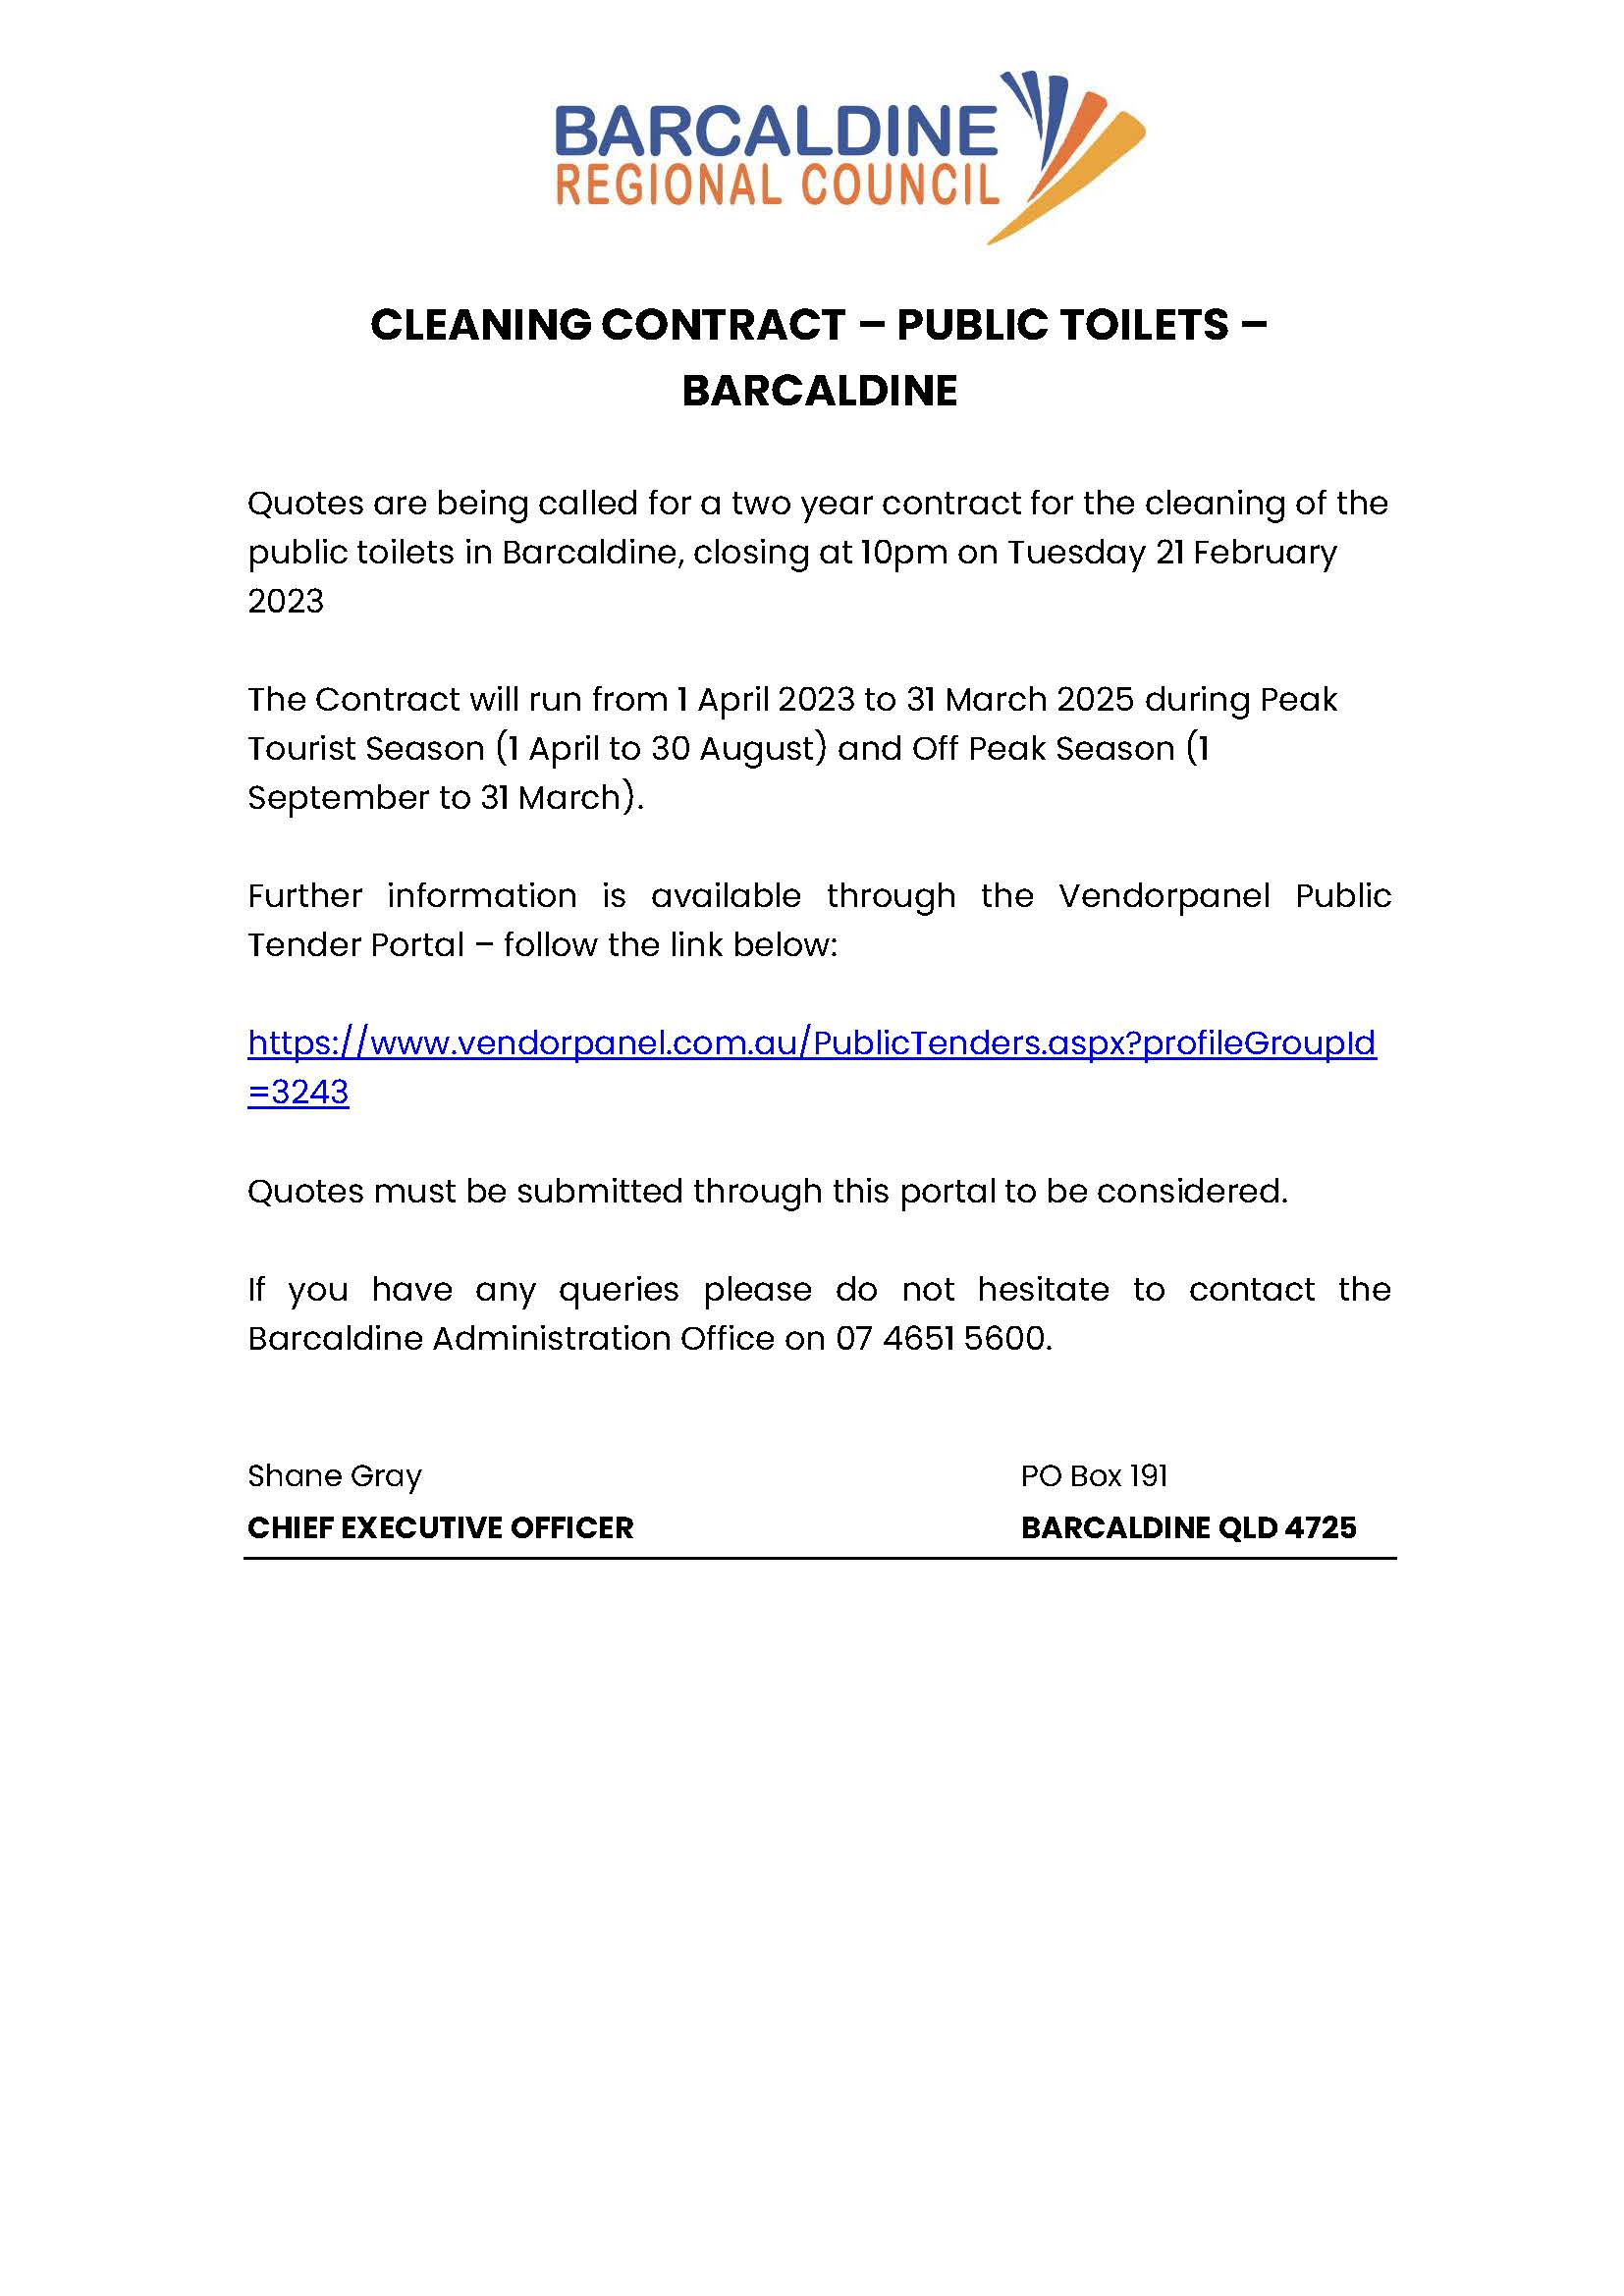 230201 Barcaldine public toilet cleaning contract advert